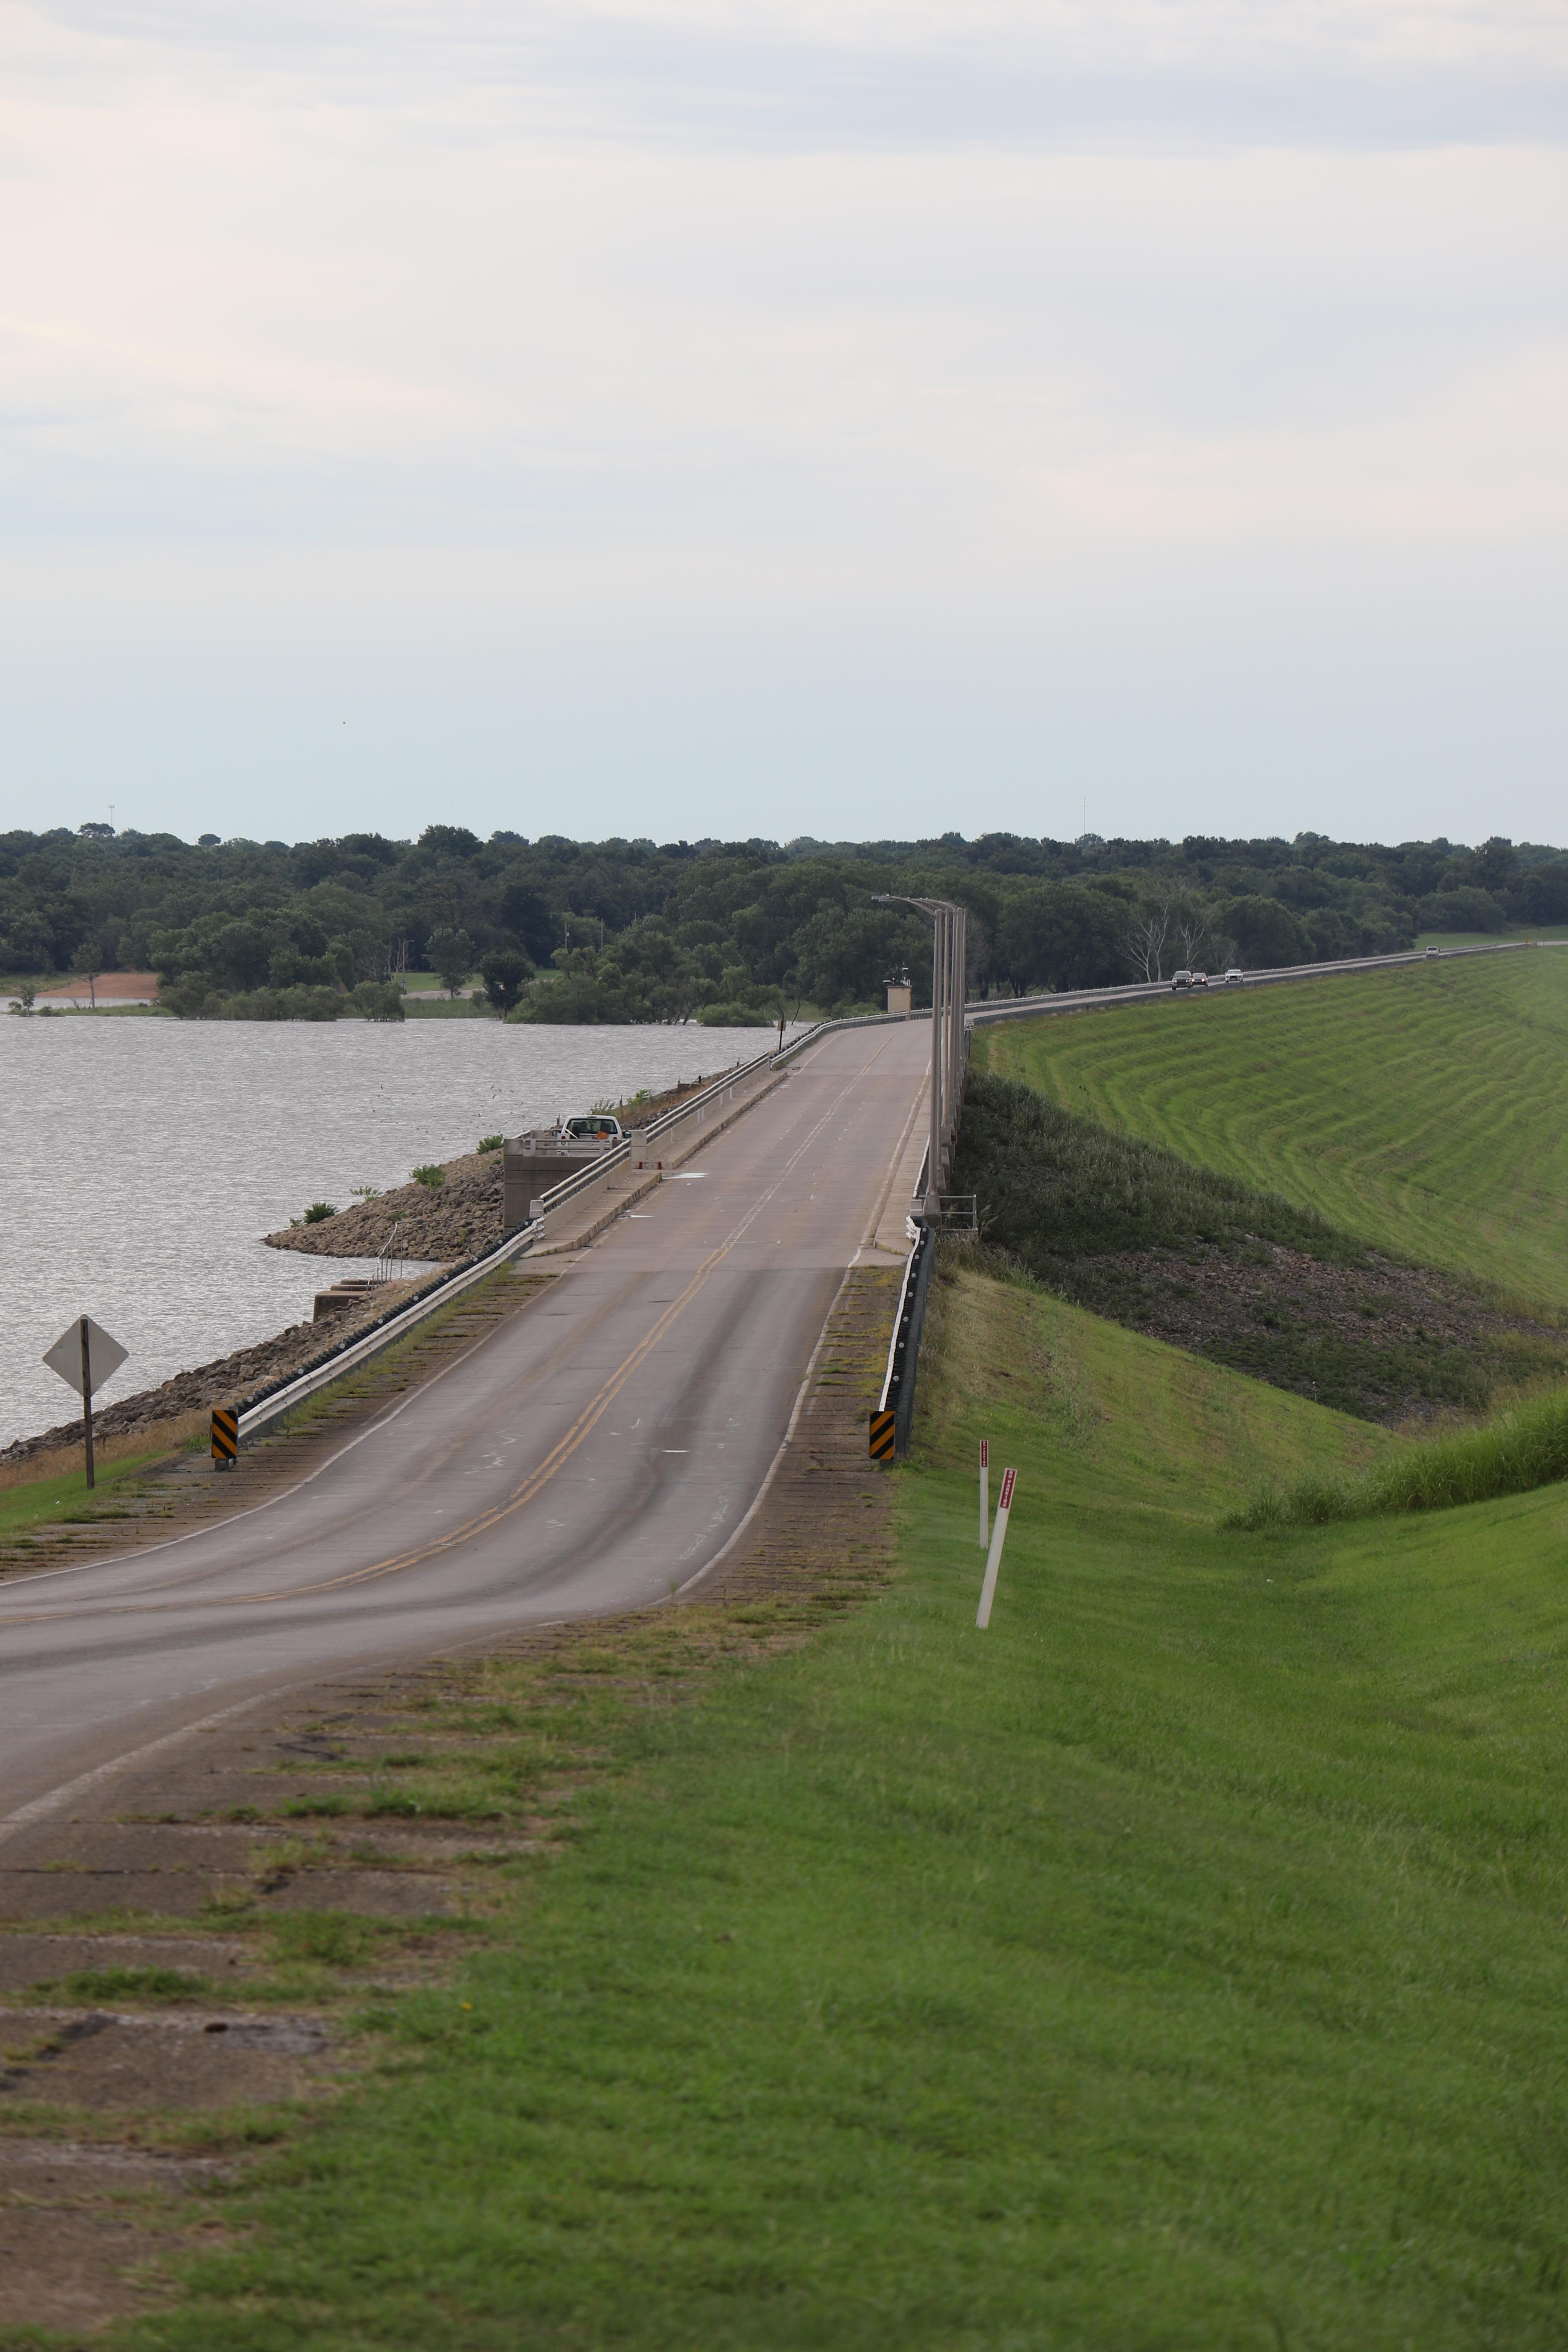 Kaw Dam Road Closed During Daytime of Friday